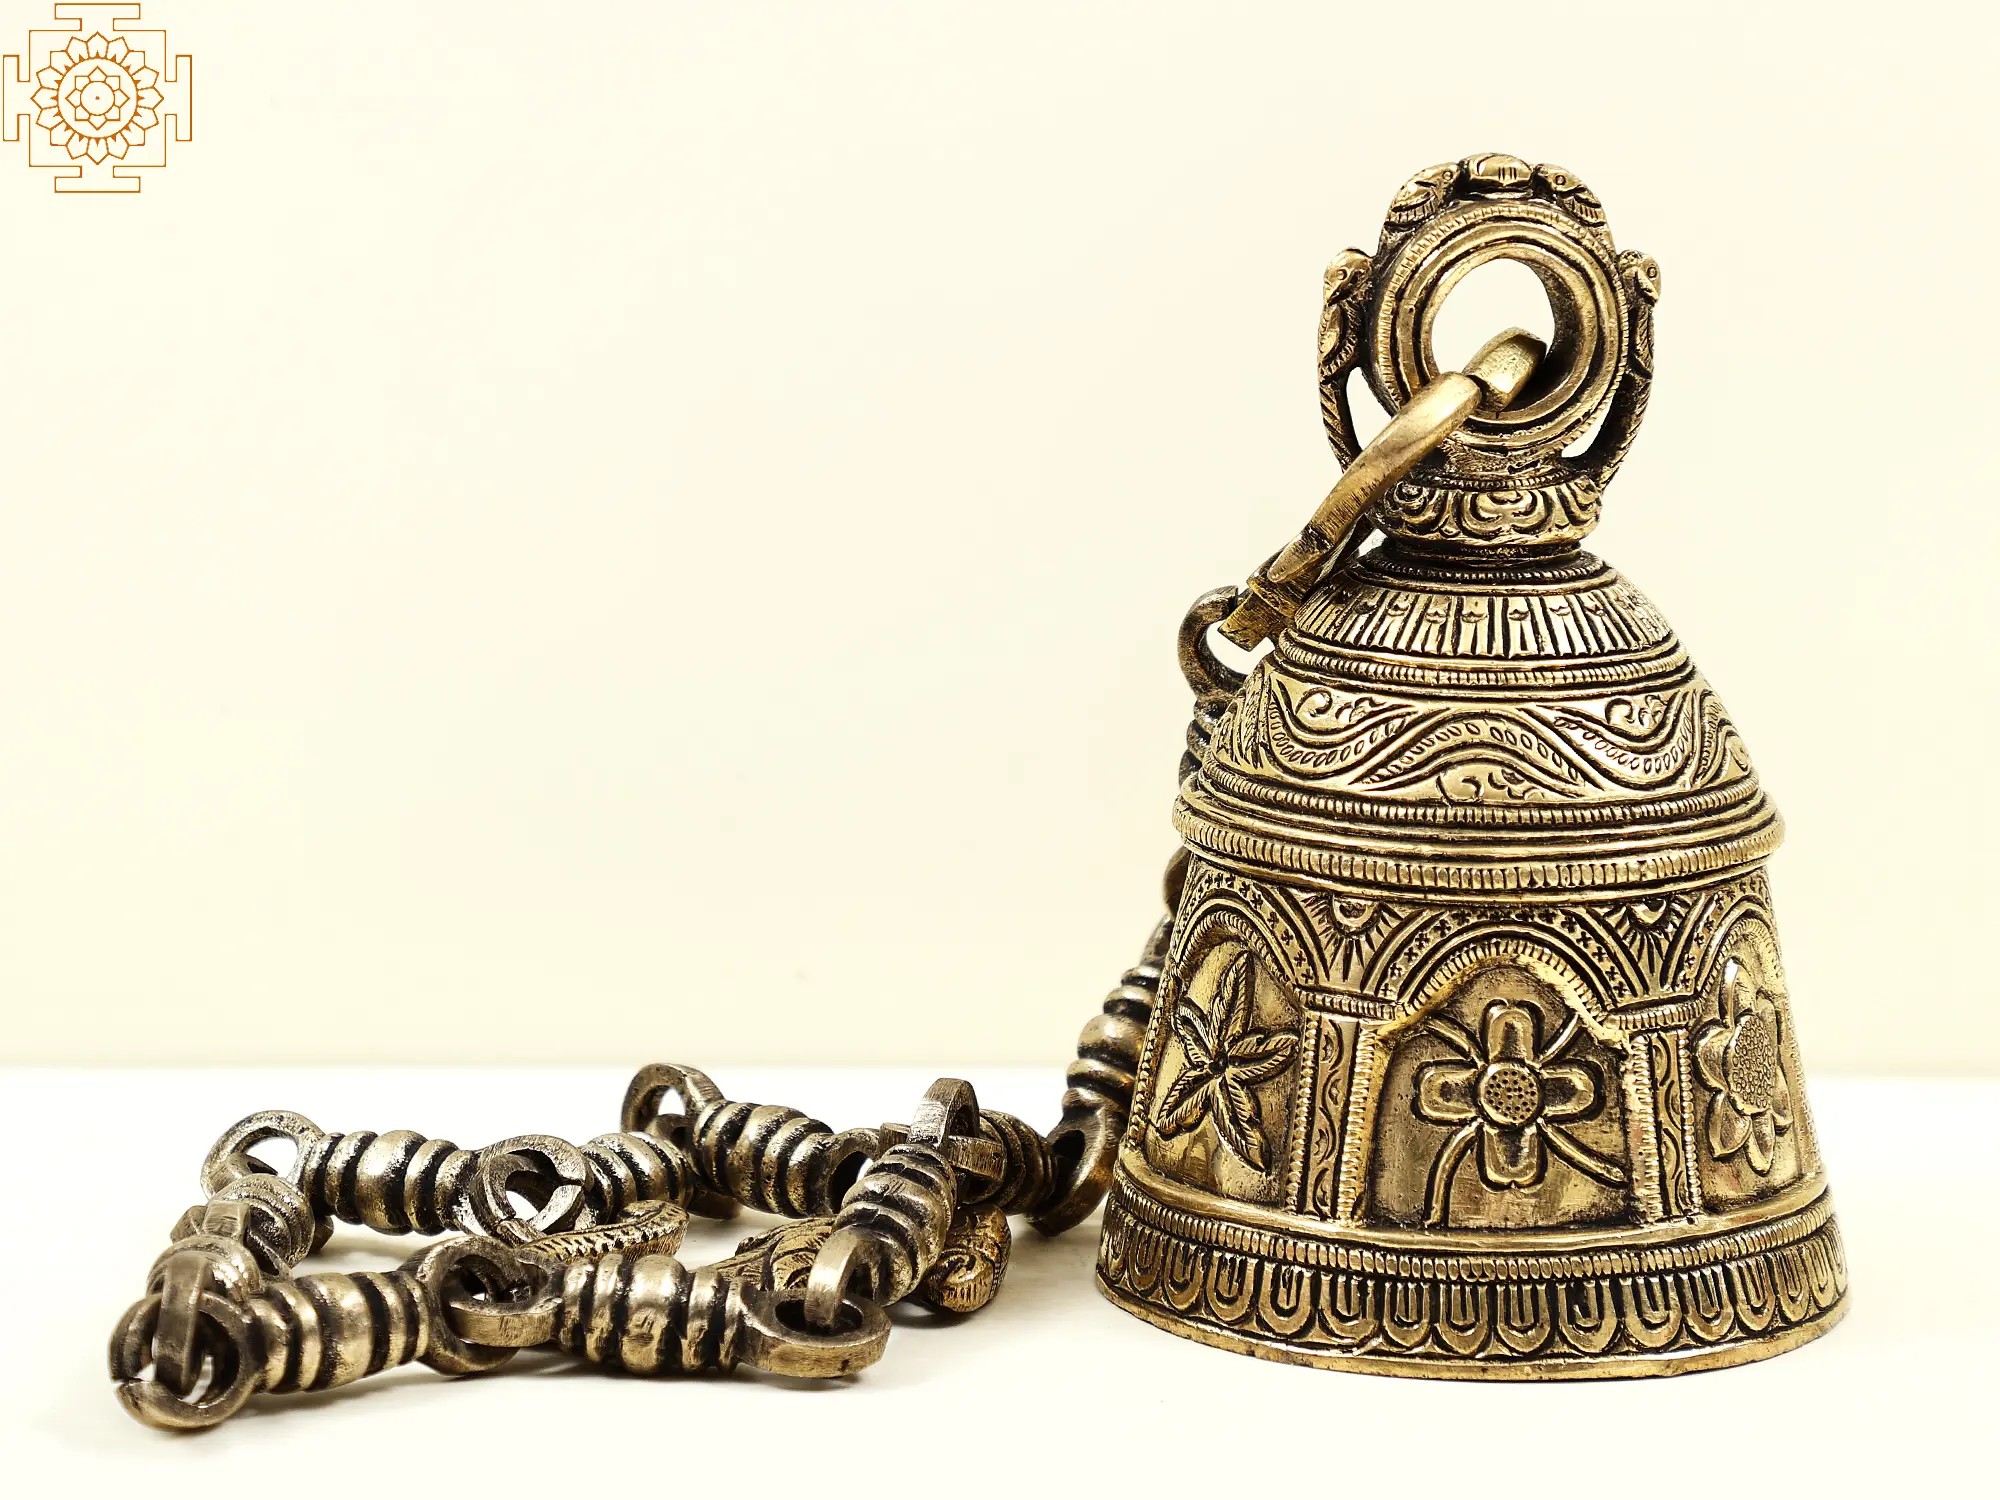 Handcrafted Brass Hanging Bell with Unique Flower and Elephant Design